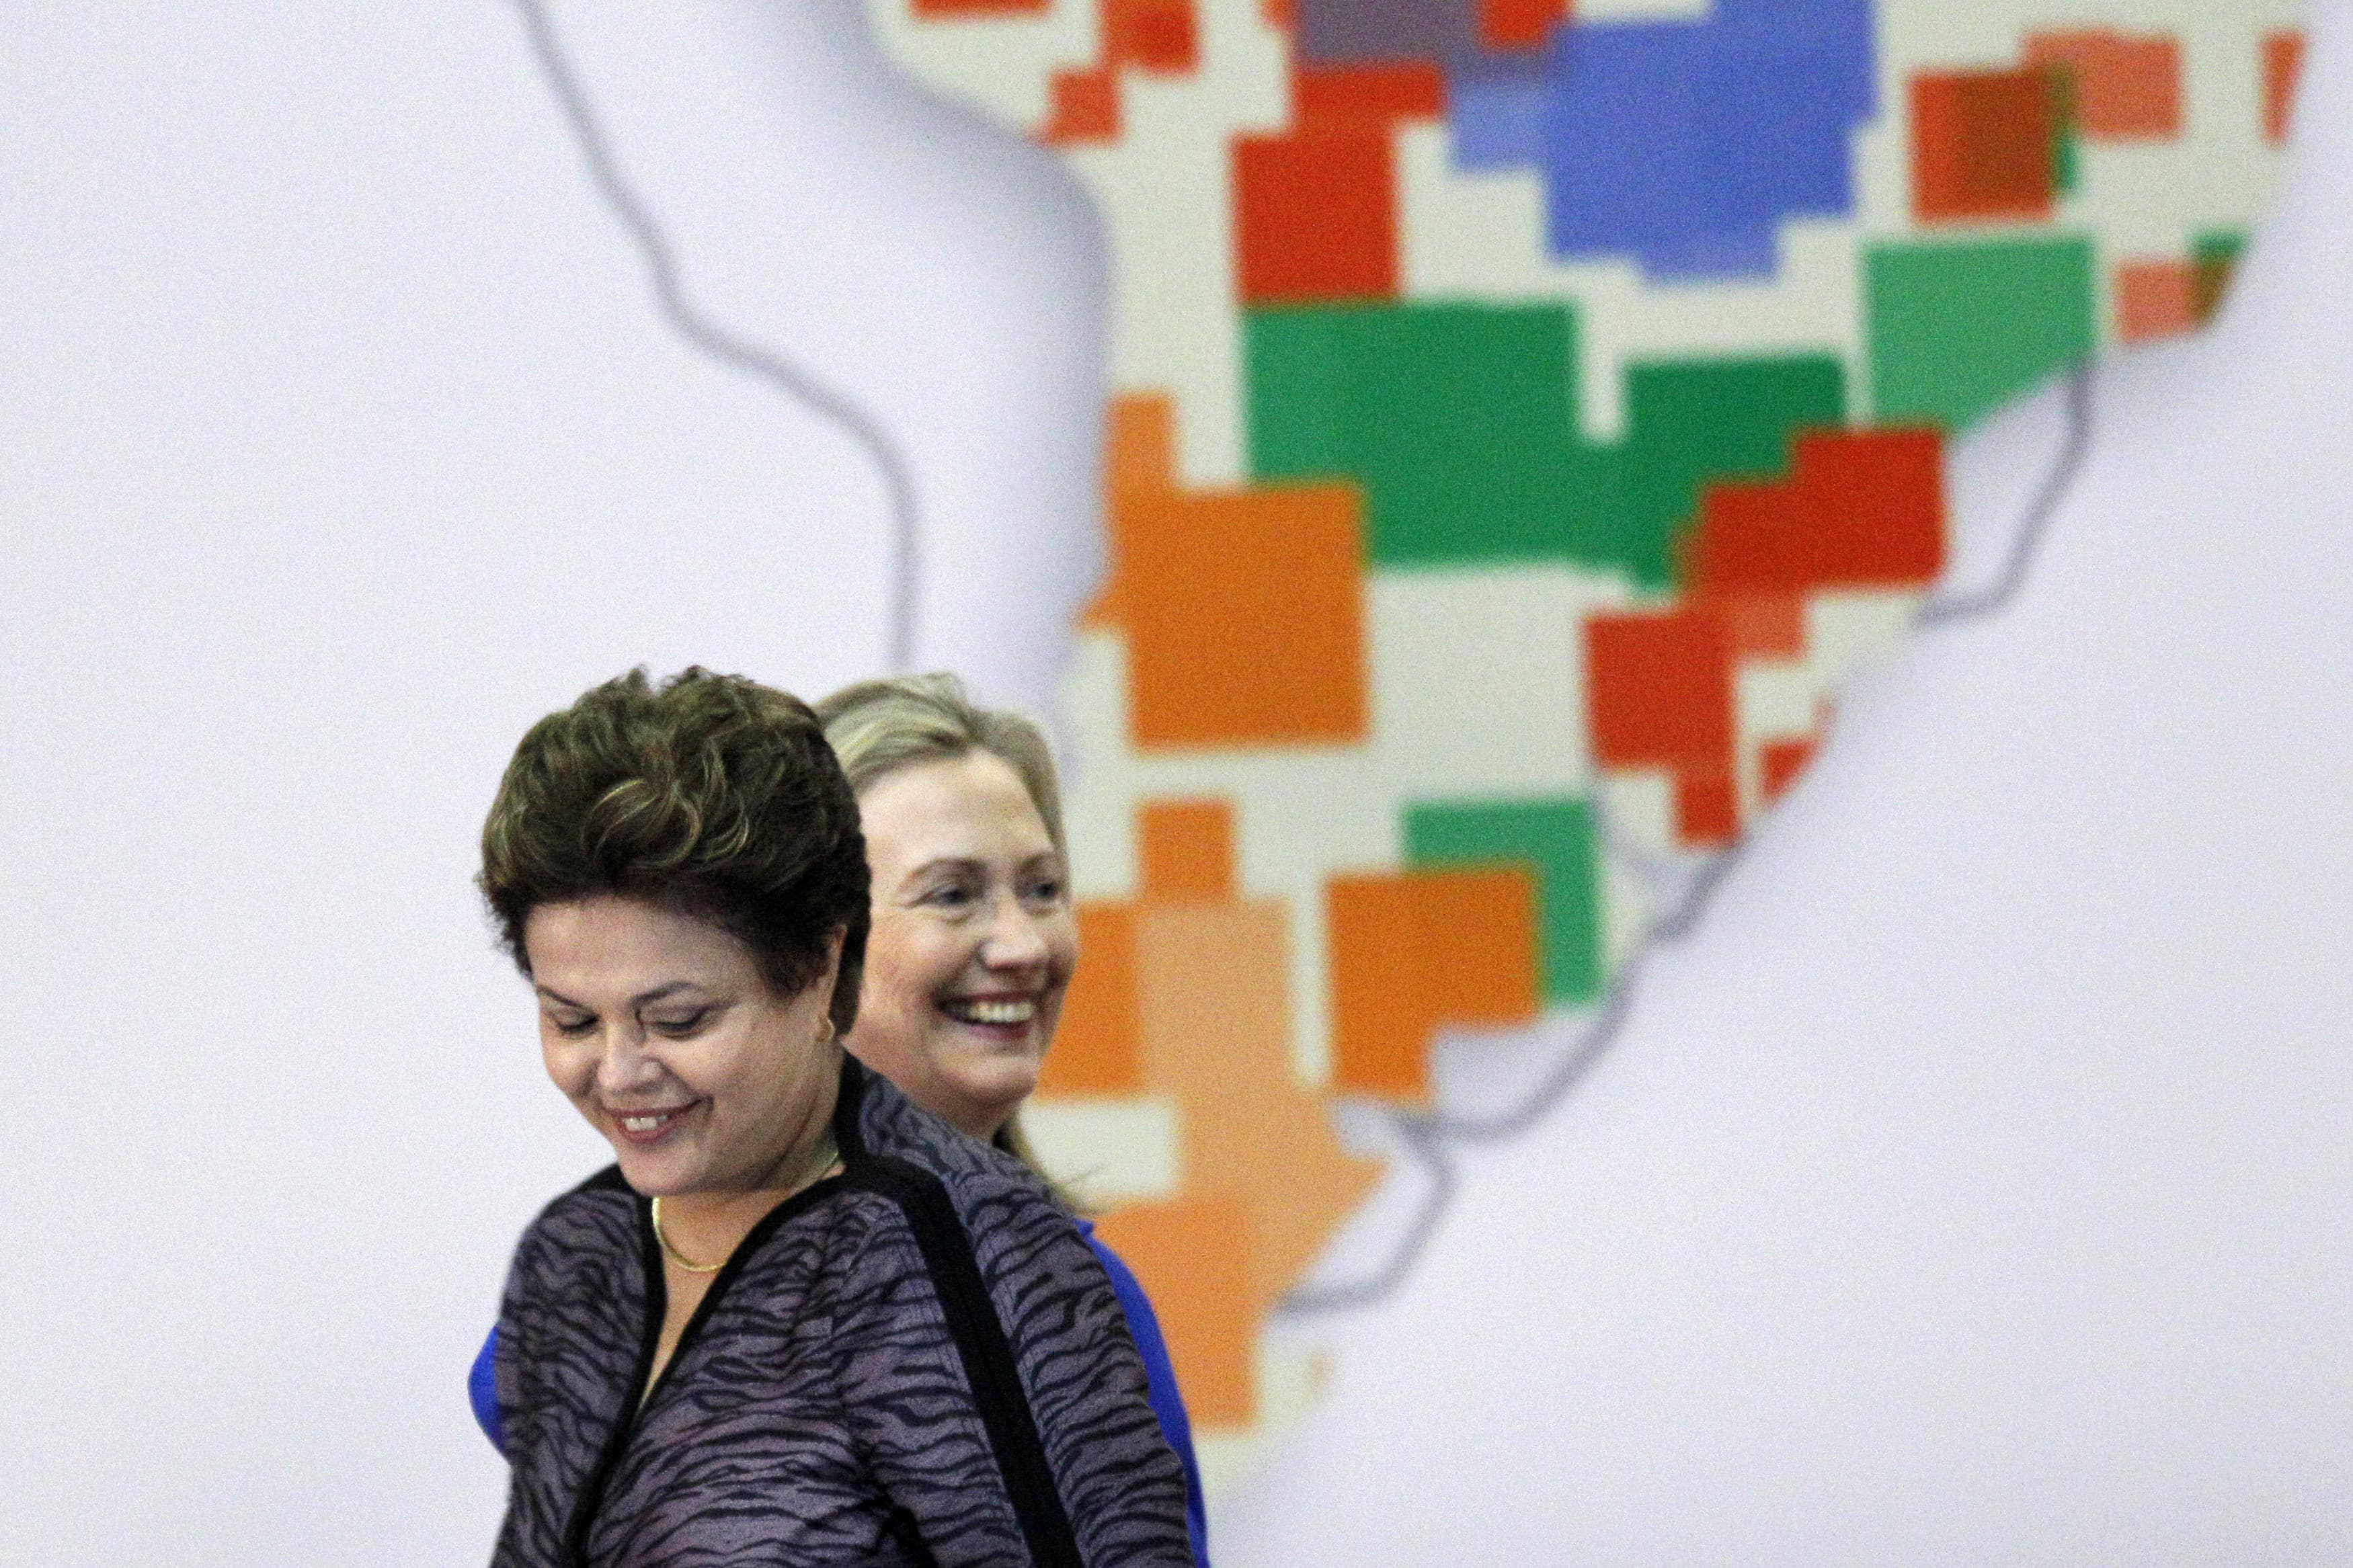 Brazil's President Dilma Rousseff and US Secretary of State Hilary Clinton participate in the annual conference "Open Government Partnership" in Brasilia, 17 April 2012 , REUTERS/Ueslei Marcelino